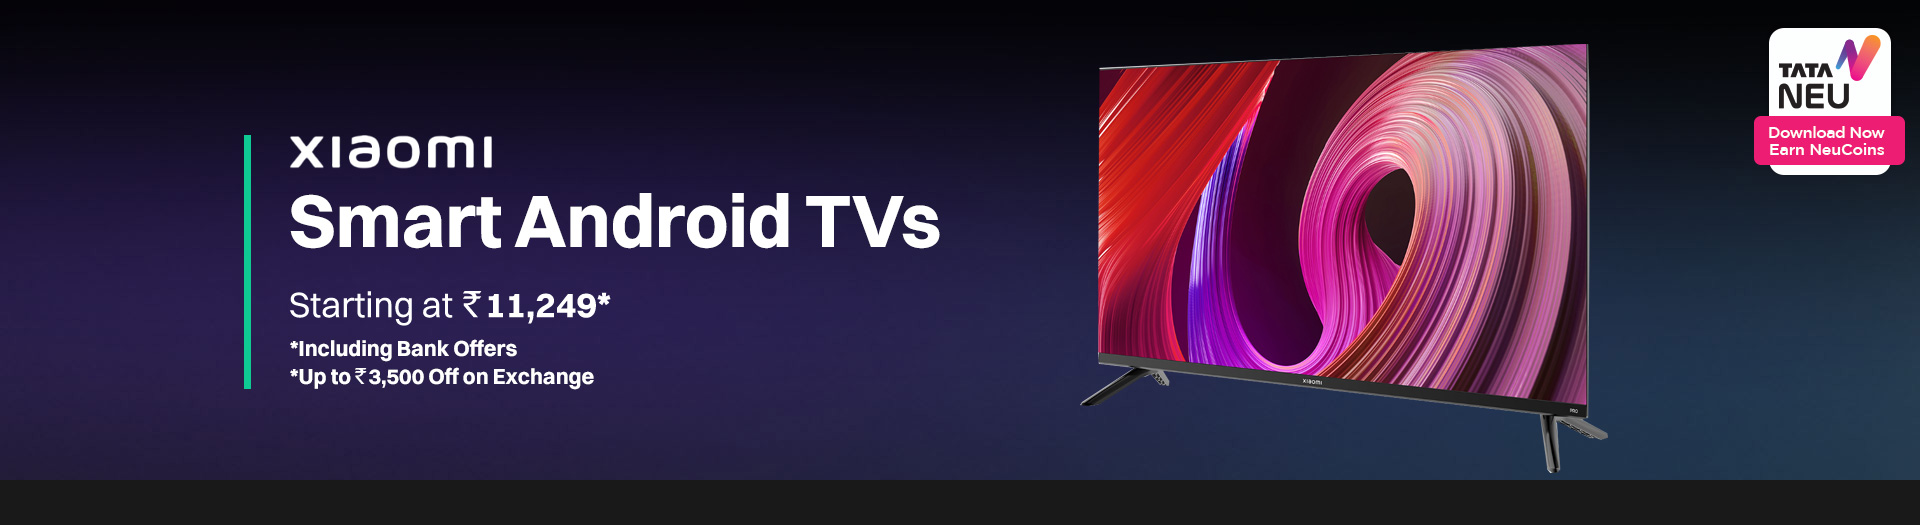 croma.com - Smart Android TVs by the Xiaomi brand